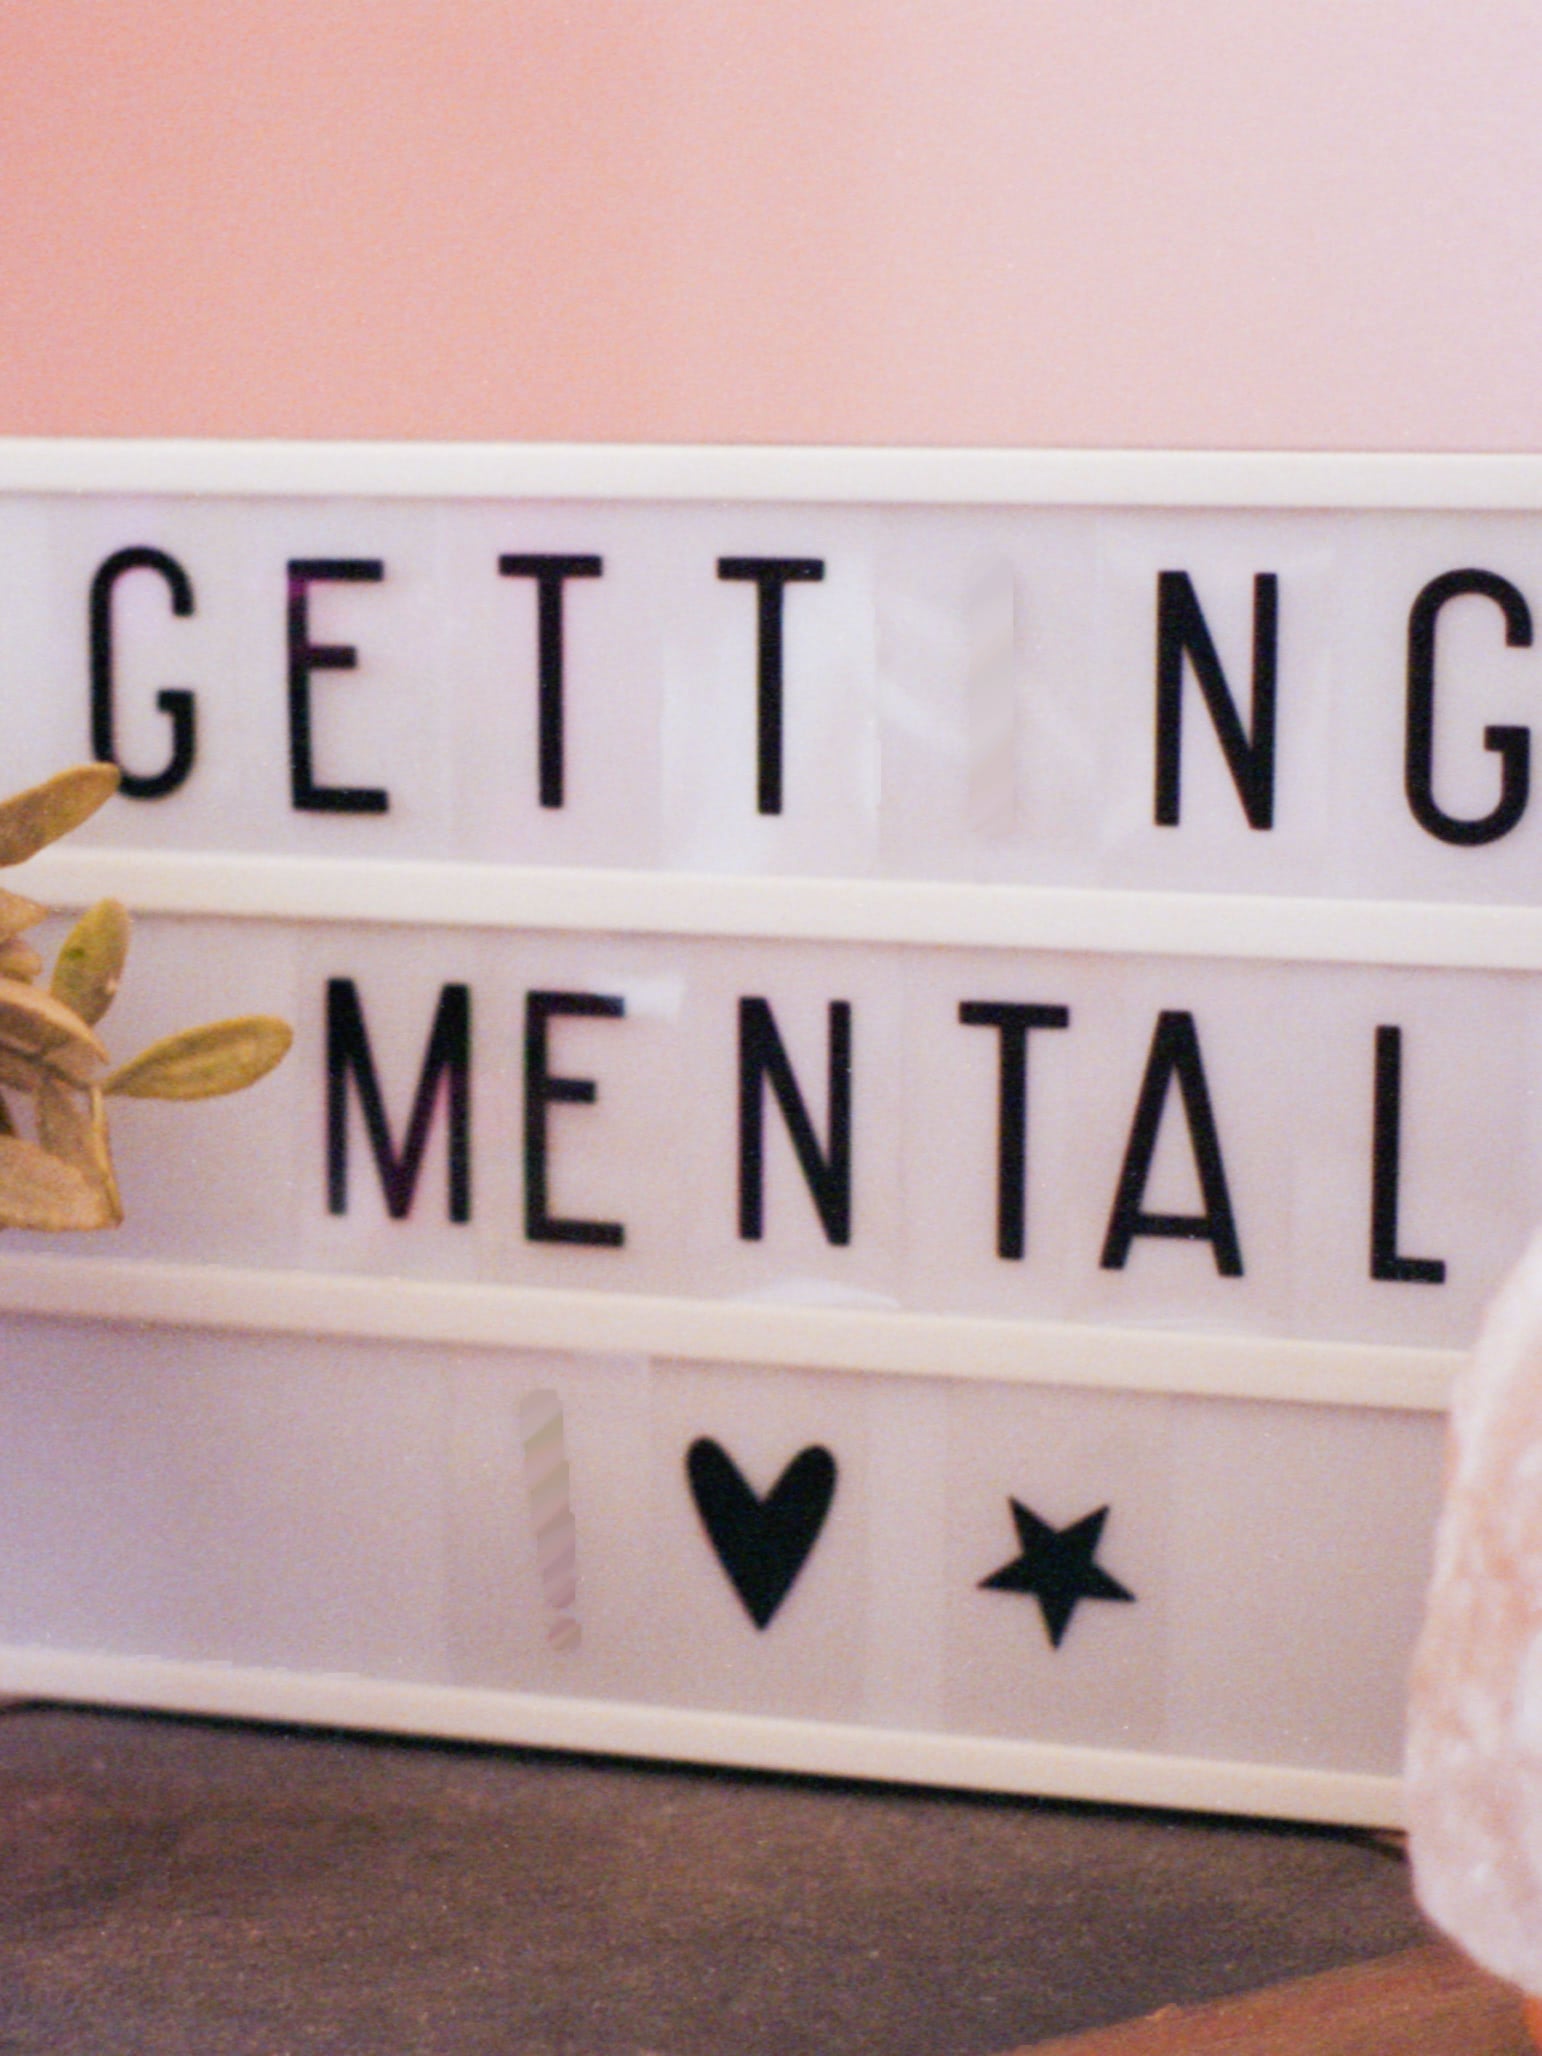 A sign for the Getting Mental podcast by Brenda Sarai Zuniga